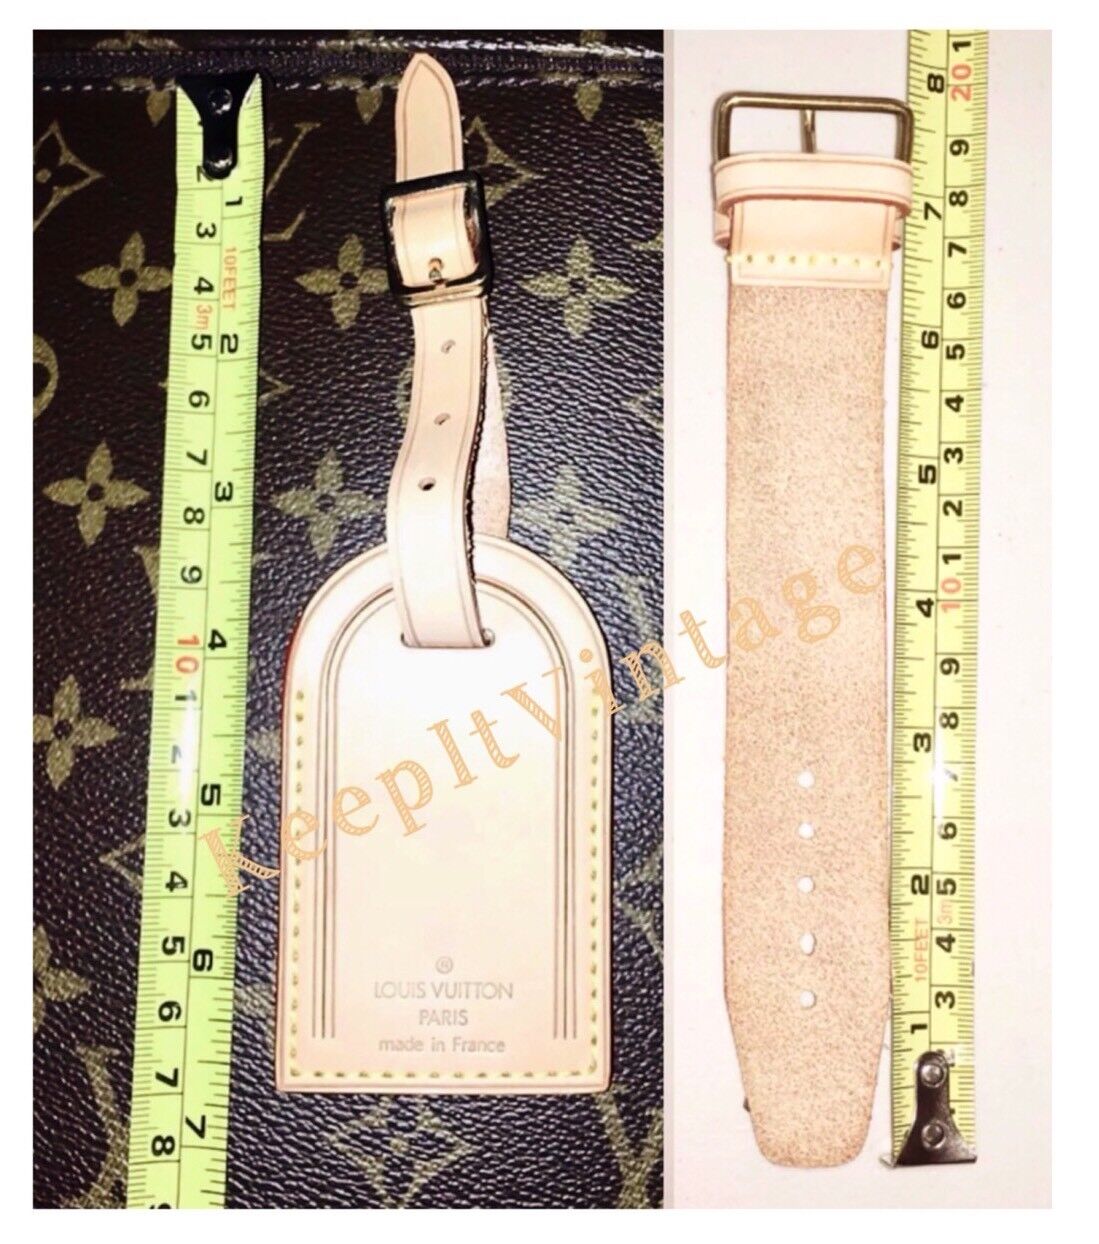 Louis Vuitton Blank Name Tag - SMALL “Restored” 1 Piece 🍁